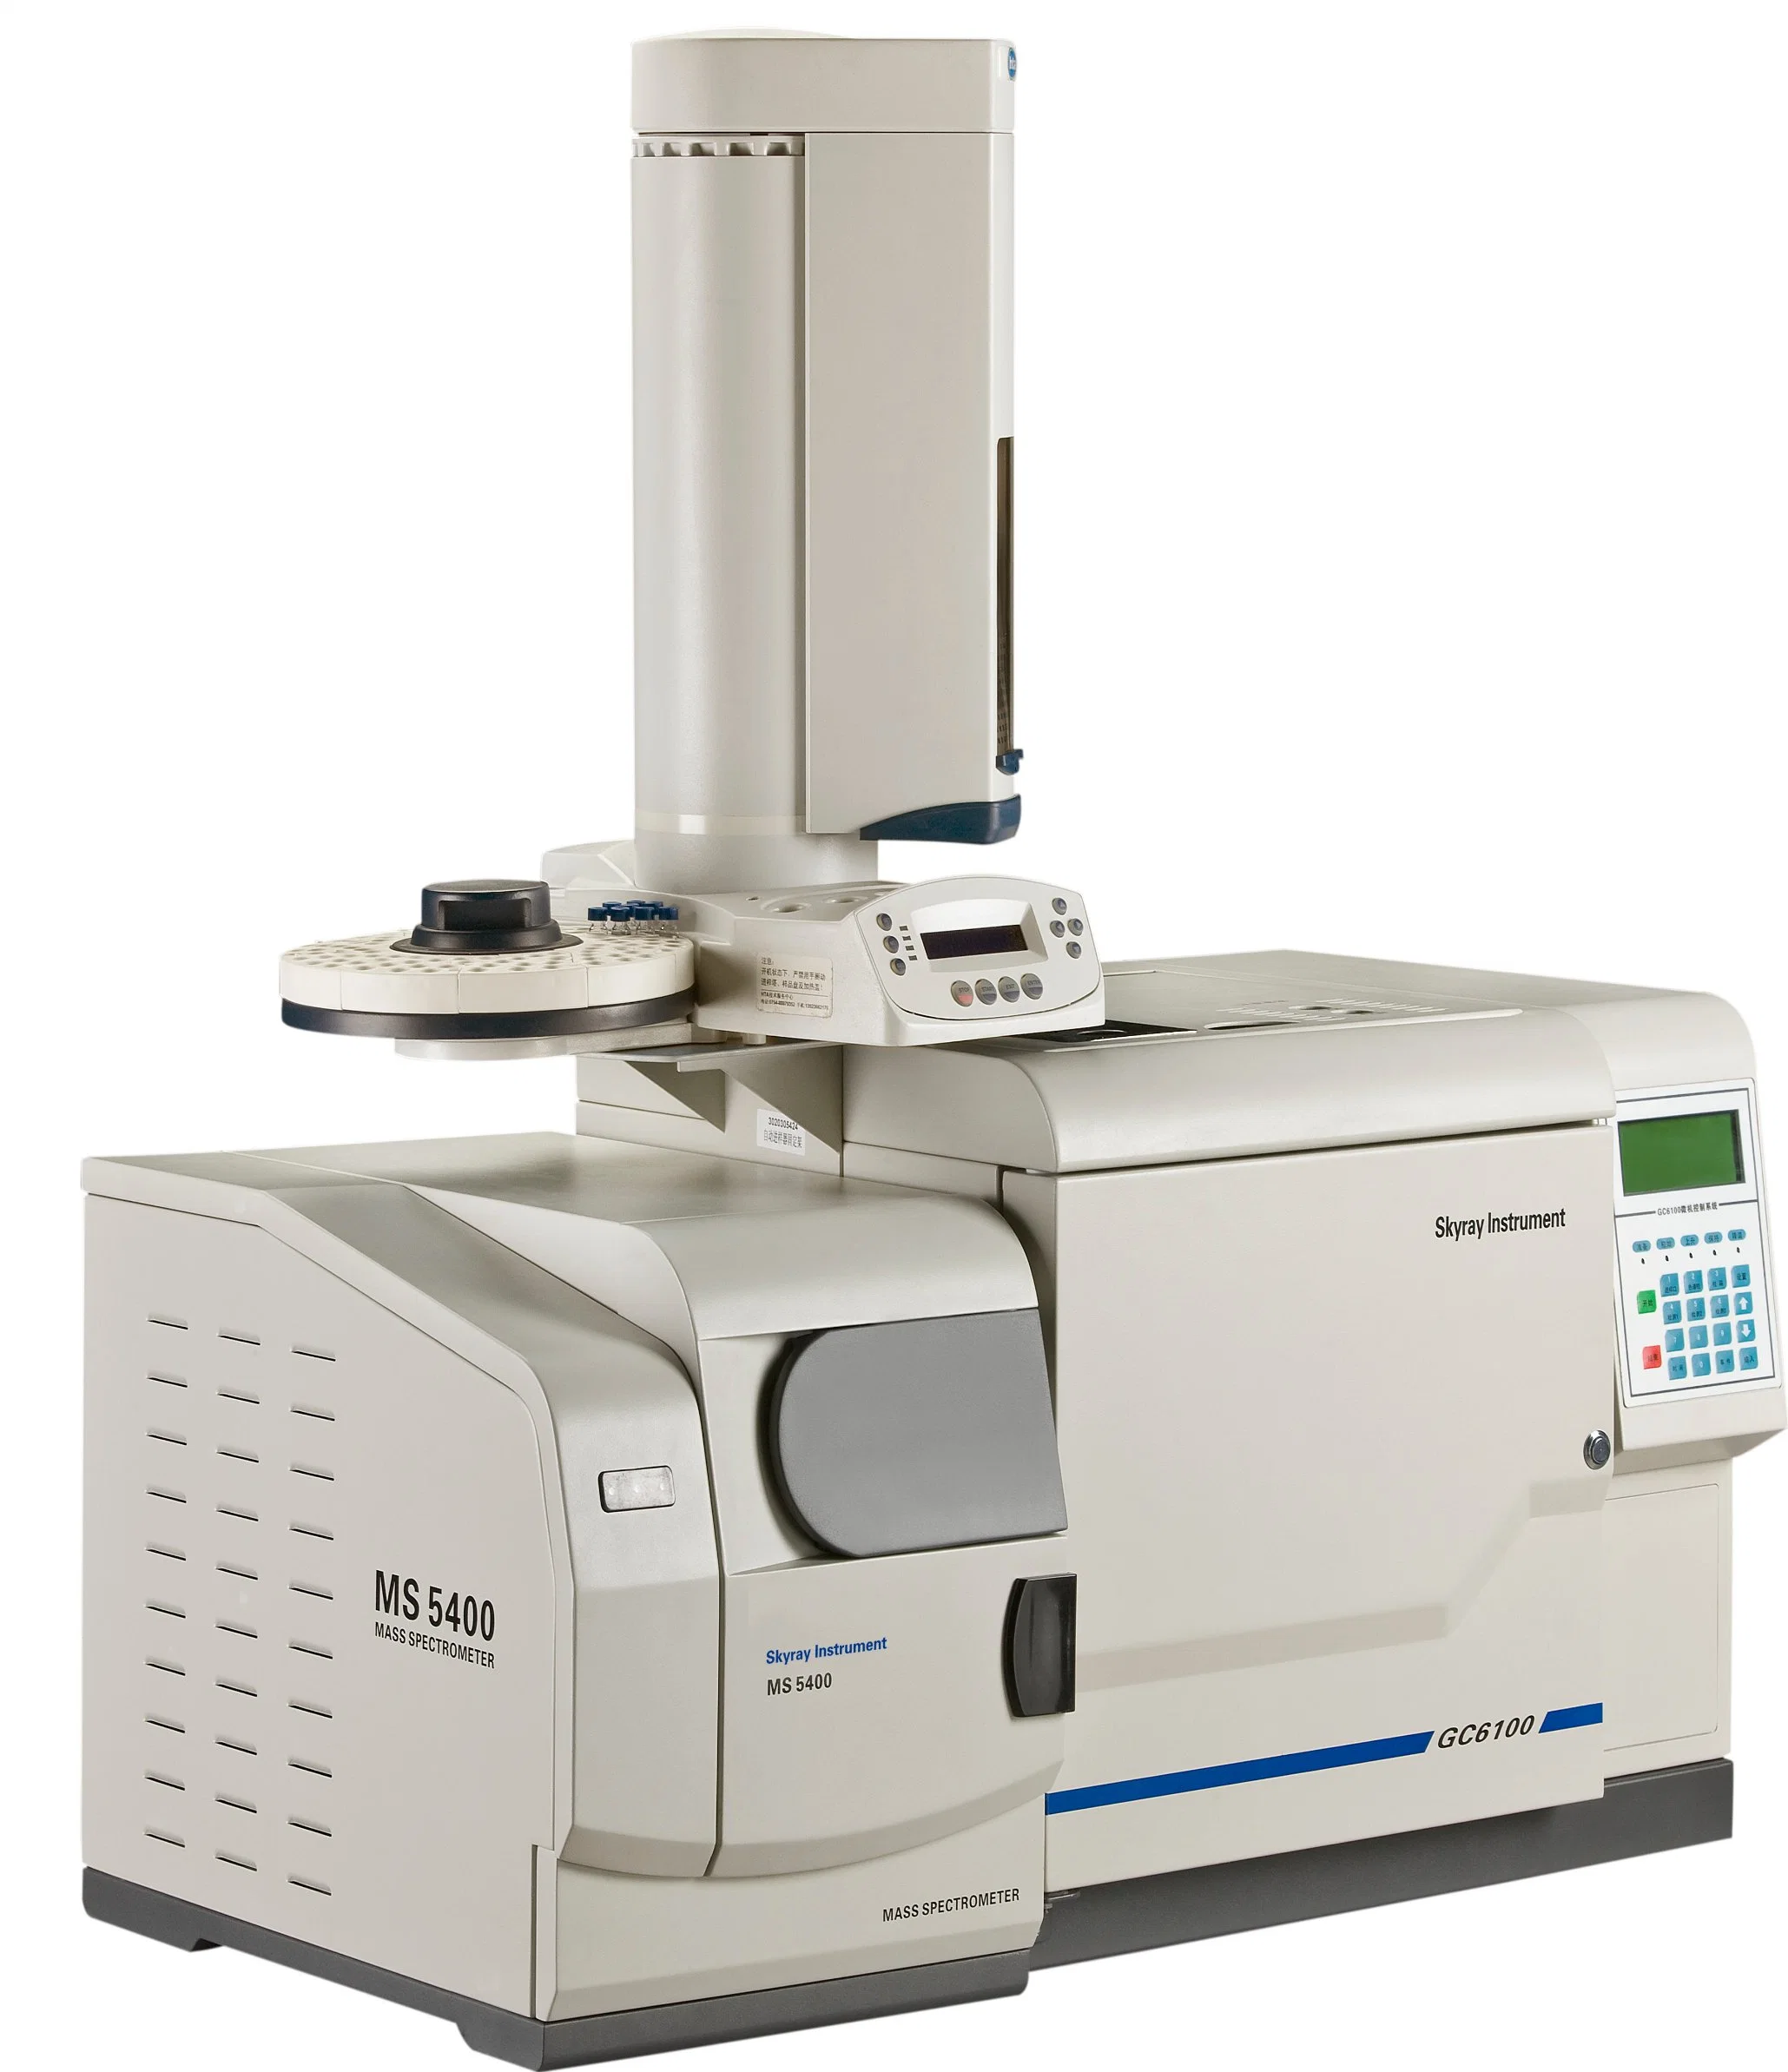 Low Cost Gas Chromatagraph Mass Spectrometer